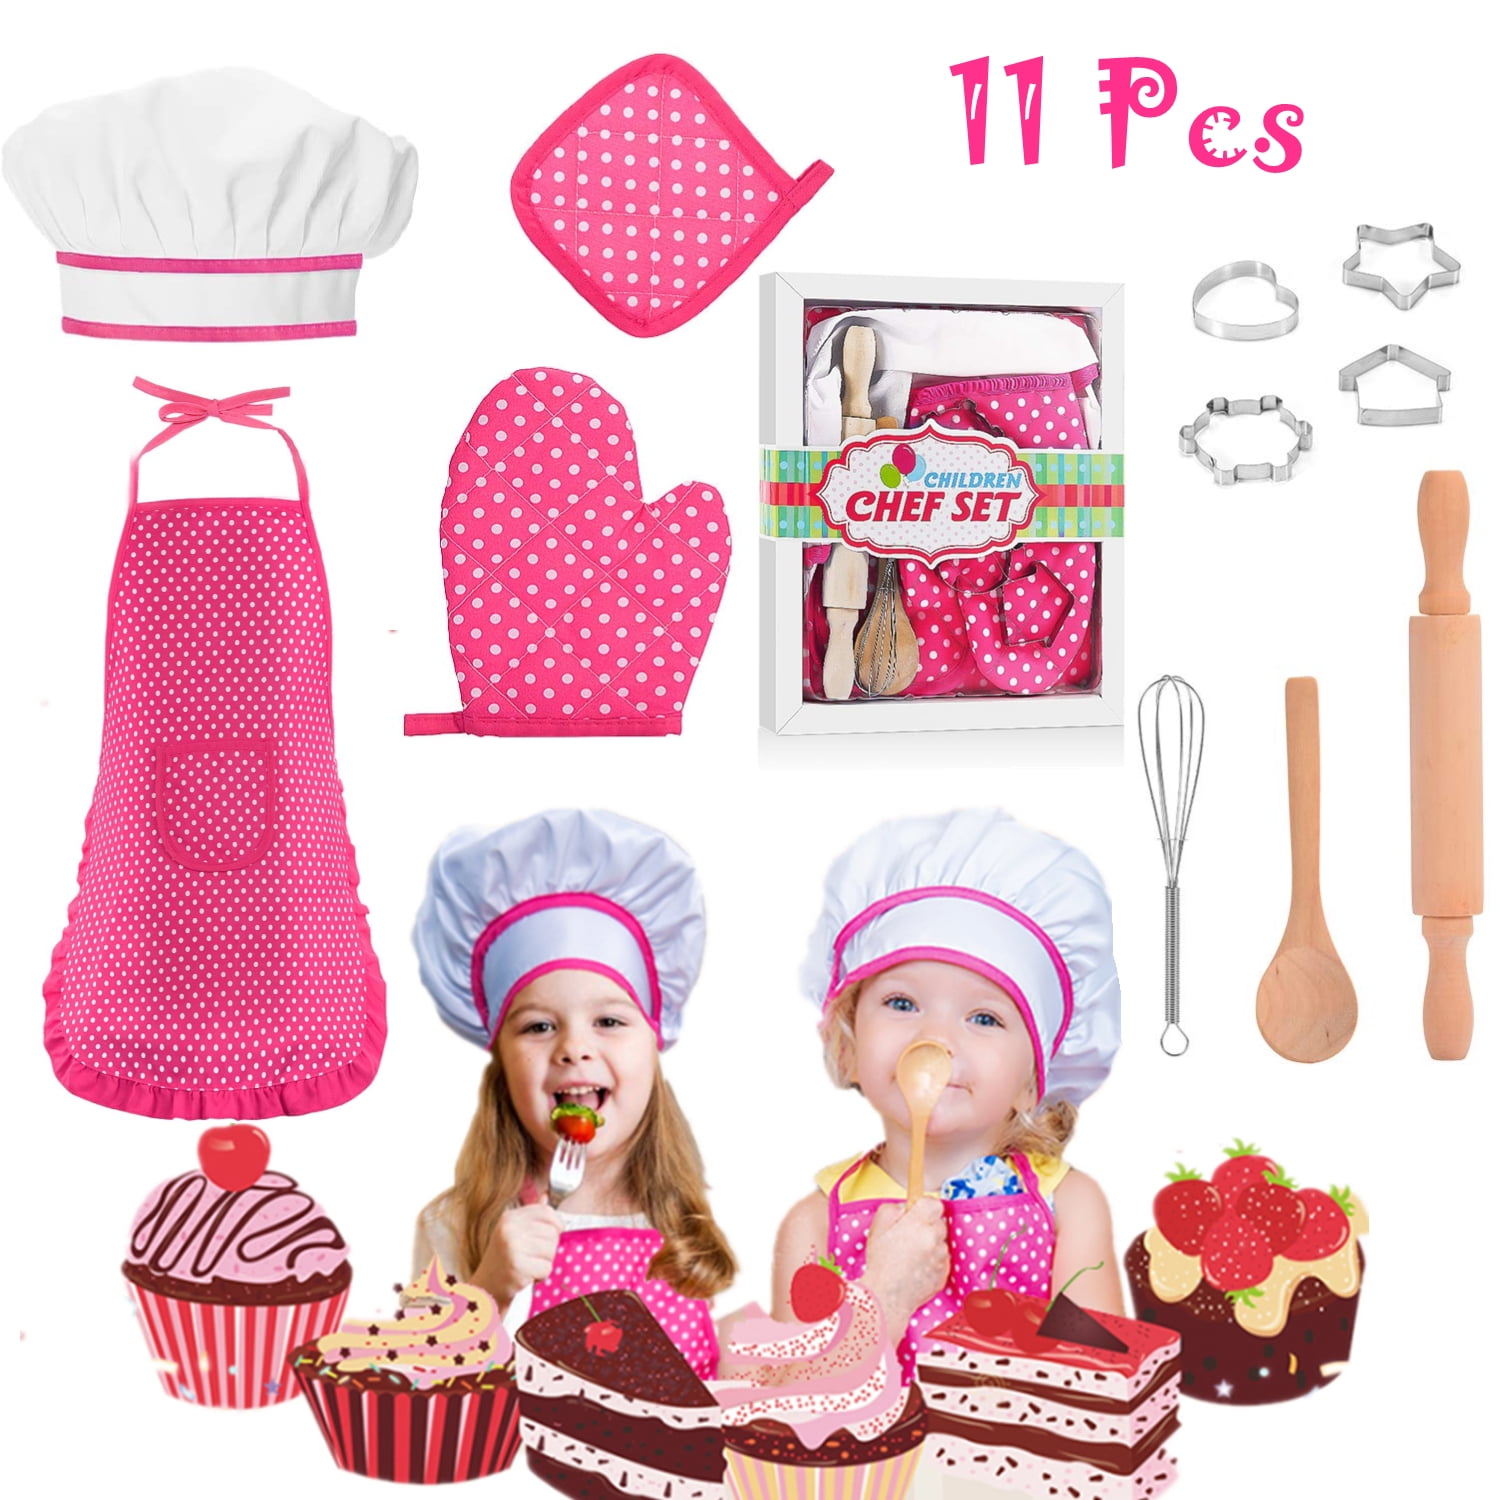 *NEW* Kids Chef Set Pretend Play Dress Up Role Kitchen Cooking and Baking Kits 